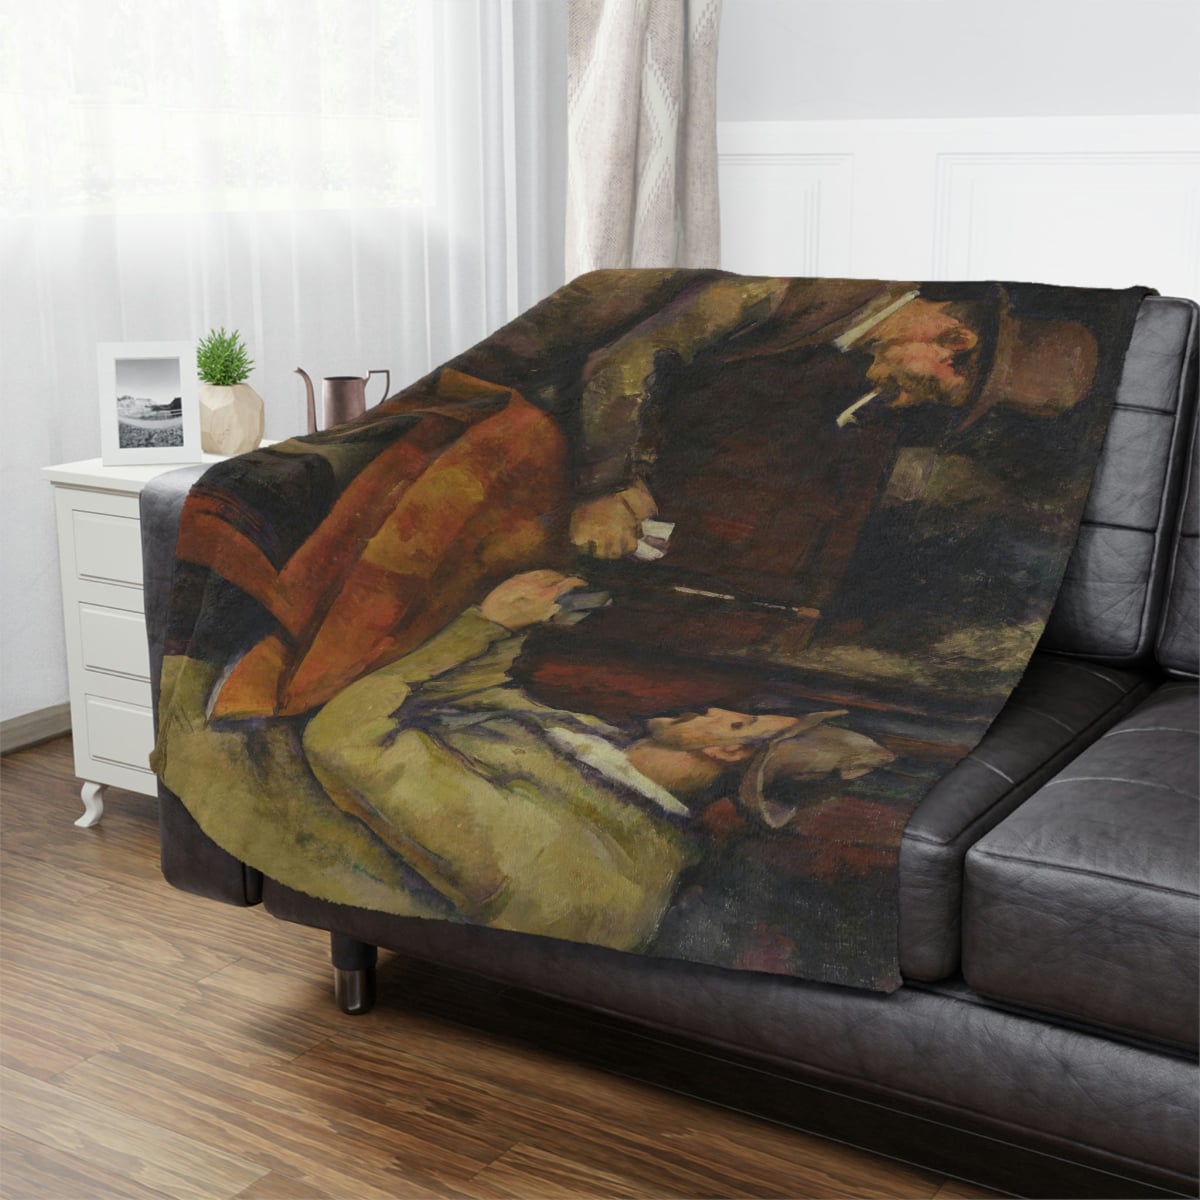 Cézanne's 'The Card Players' Art Blanket draped over a sofa